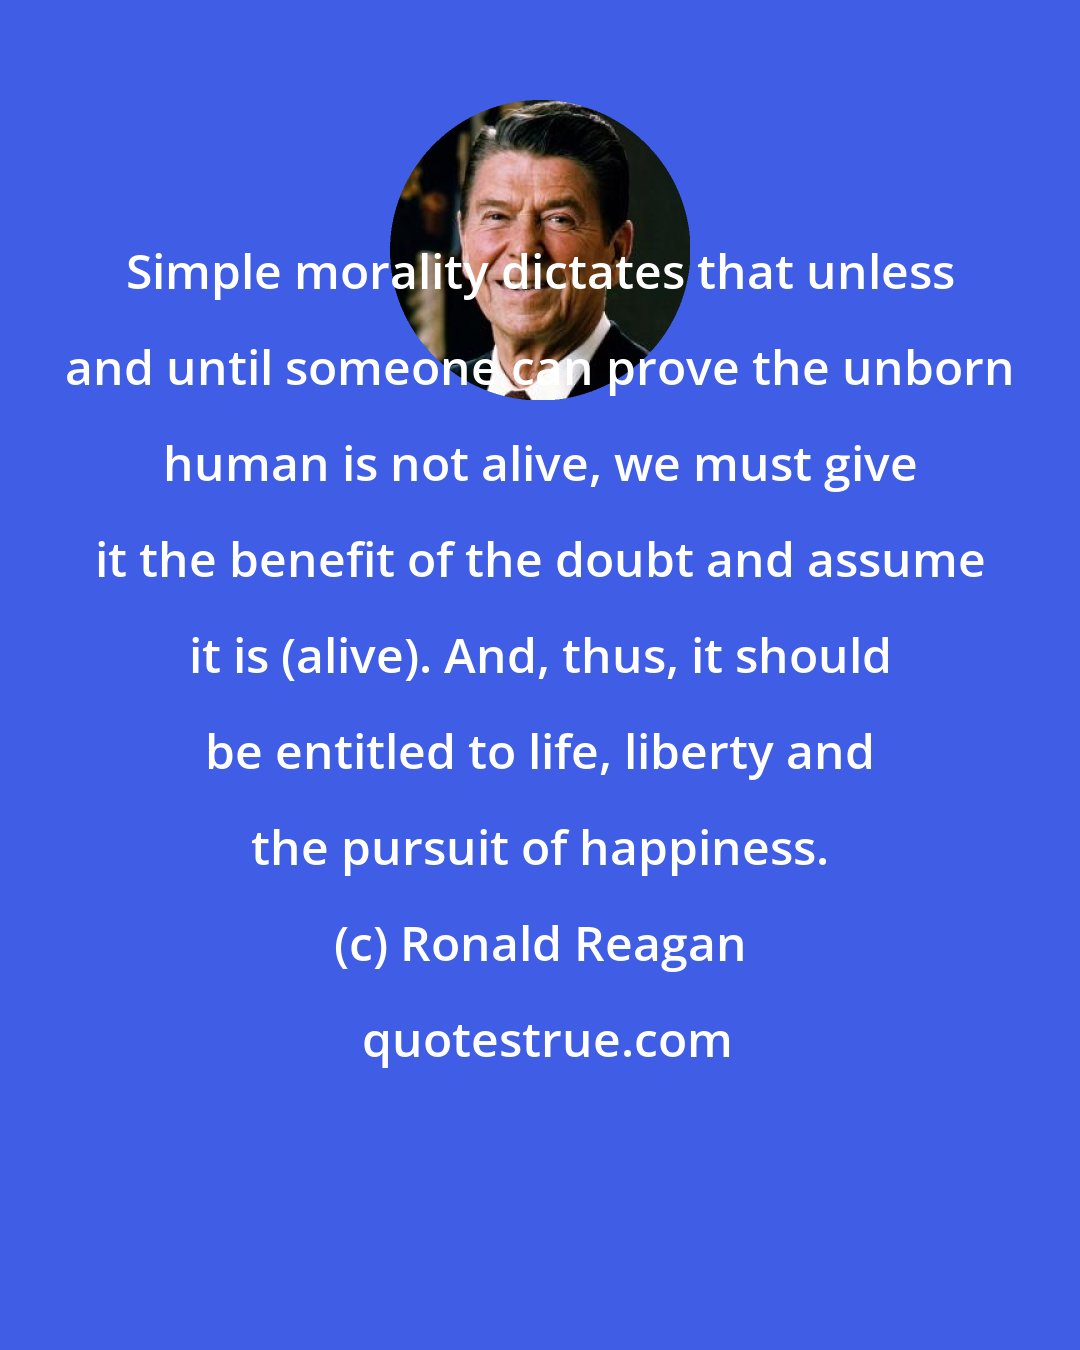 Ronald Reagan: Simple morality dictates that unless and until someone can prove the unborn human is not alive, we must give it the benefit of the doubt and assume it is (alive). And, thus, it should be entitled to life, liberty and the pursuit of happiness.